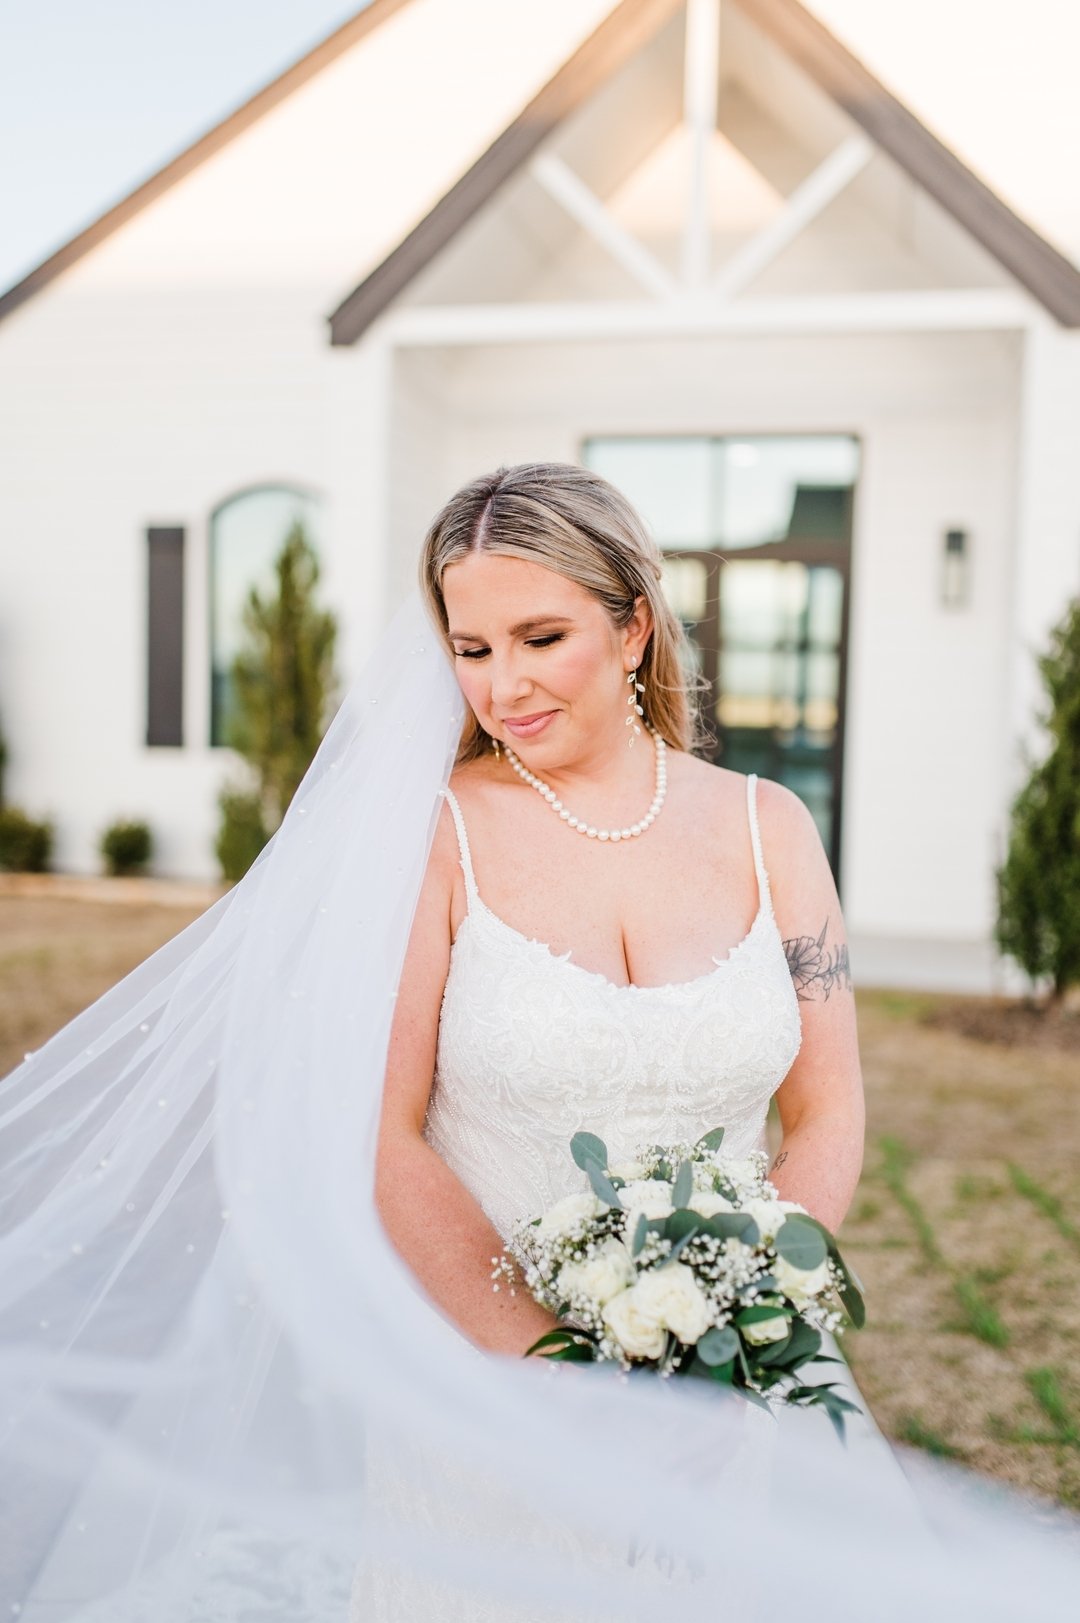 Spilling the tea today about all things veils!

We LOVE a good veil! It's the pizazz we love with the dainty class a bride deserves.

Does the length of a veil matter? 
Yes and no.
For photos, we LOVE the longer veils (anything past finger tip length